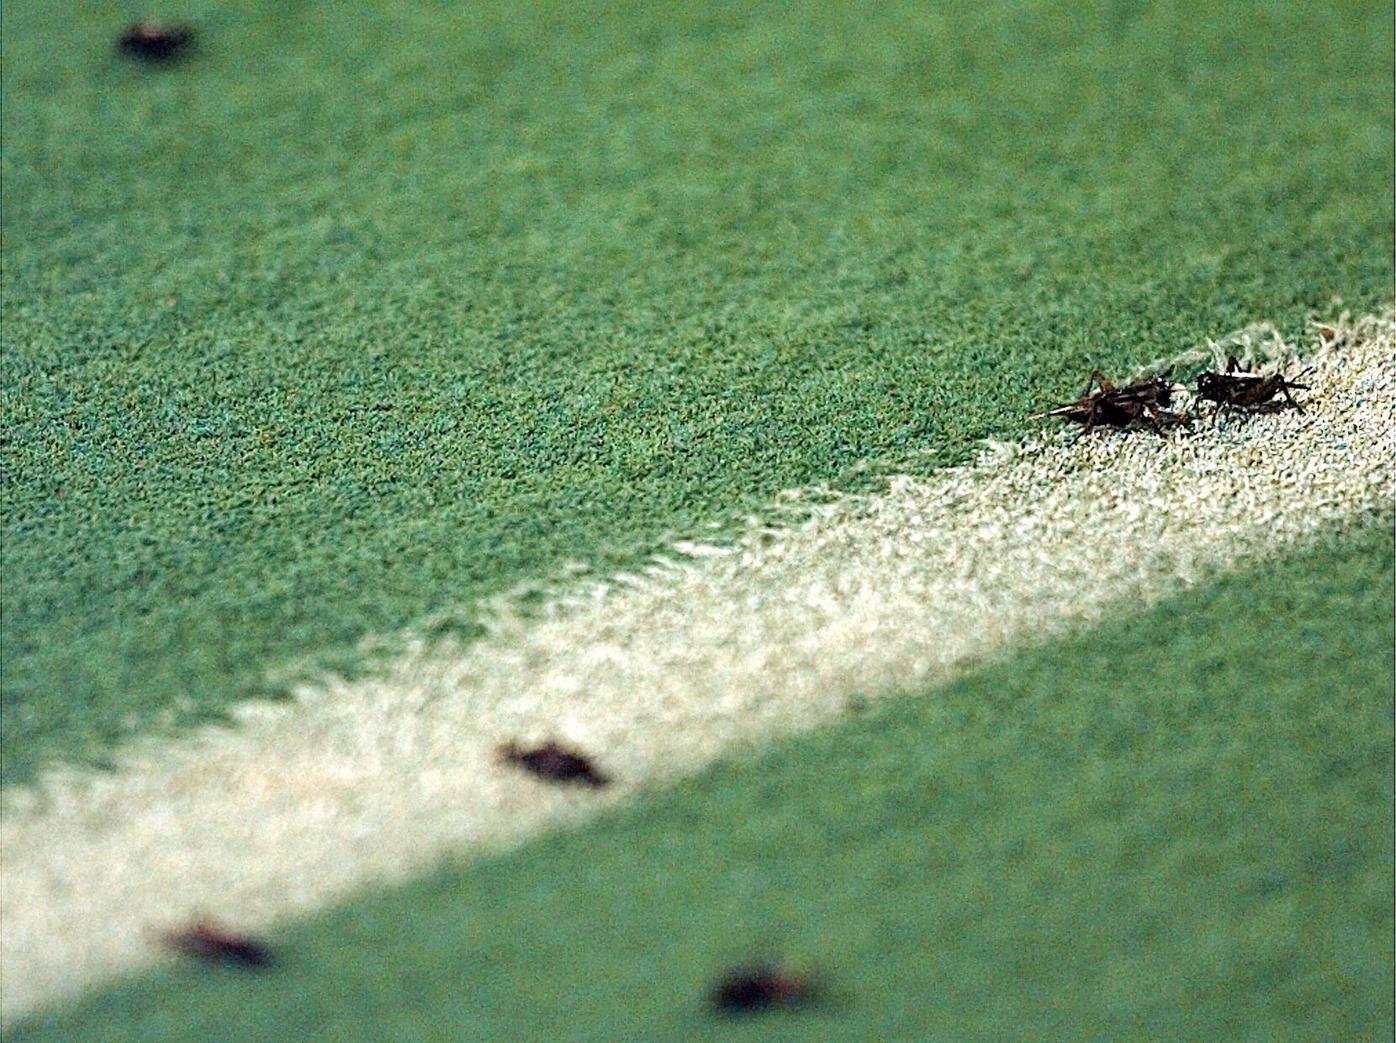 Night of the crickets: When insects invaded Lewis Field, Sports